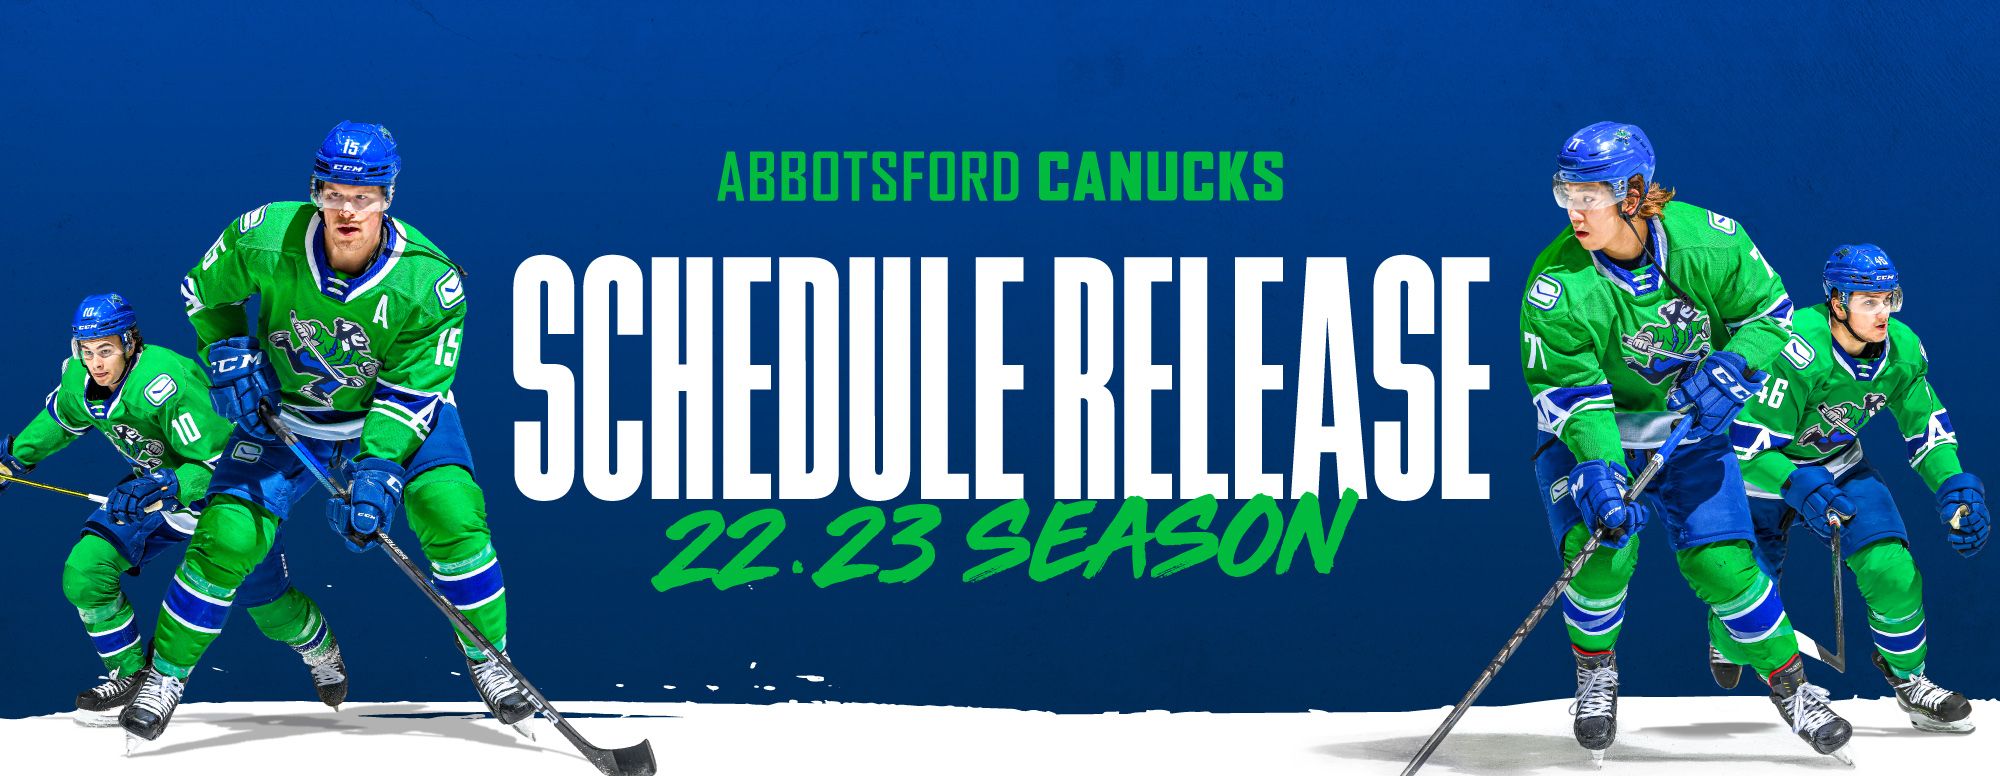 Abbotsford Canucks on X: The Year End Sale starts this Saturday